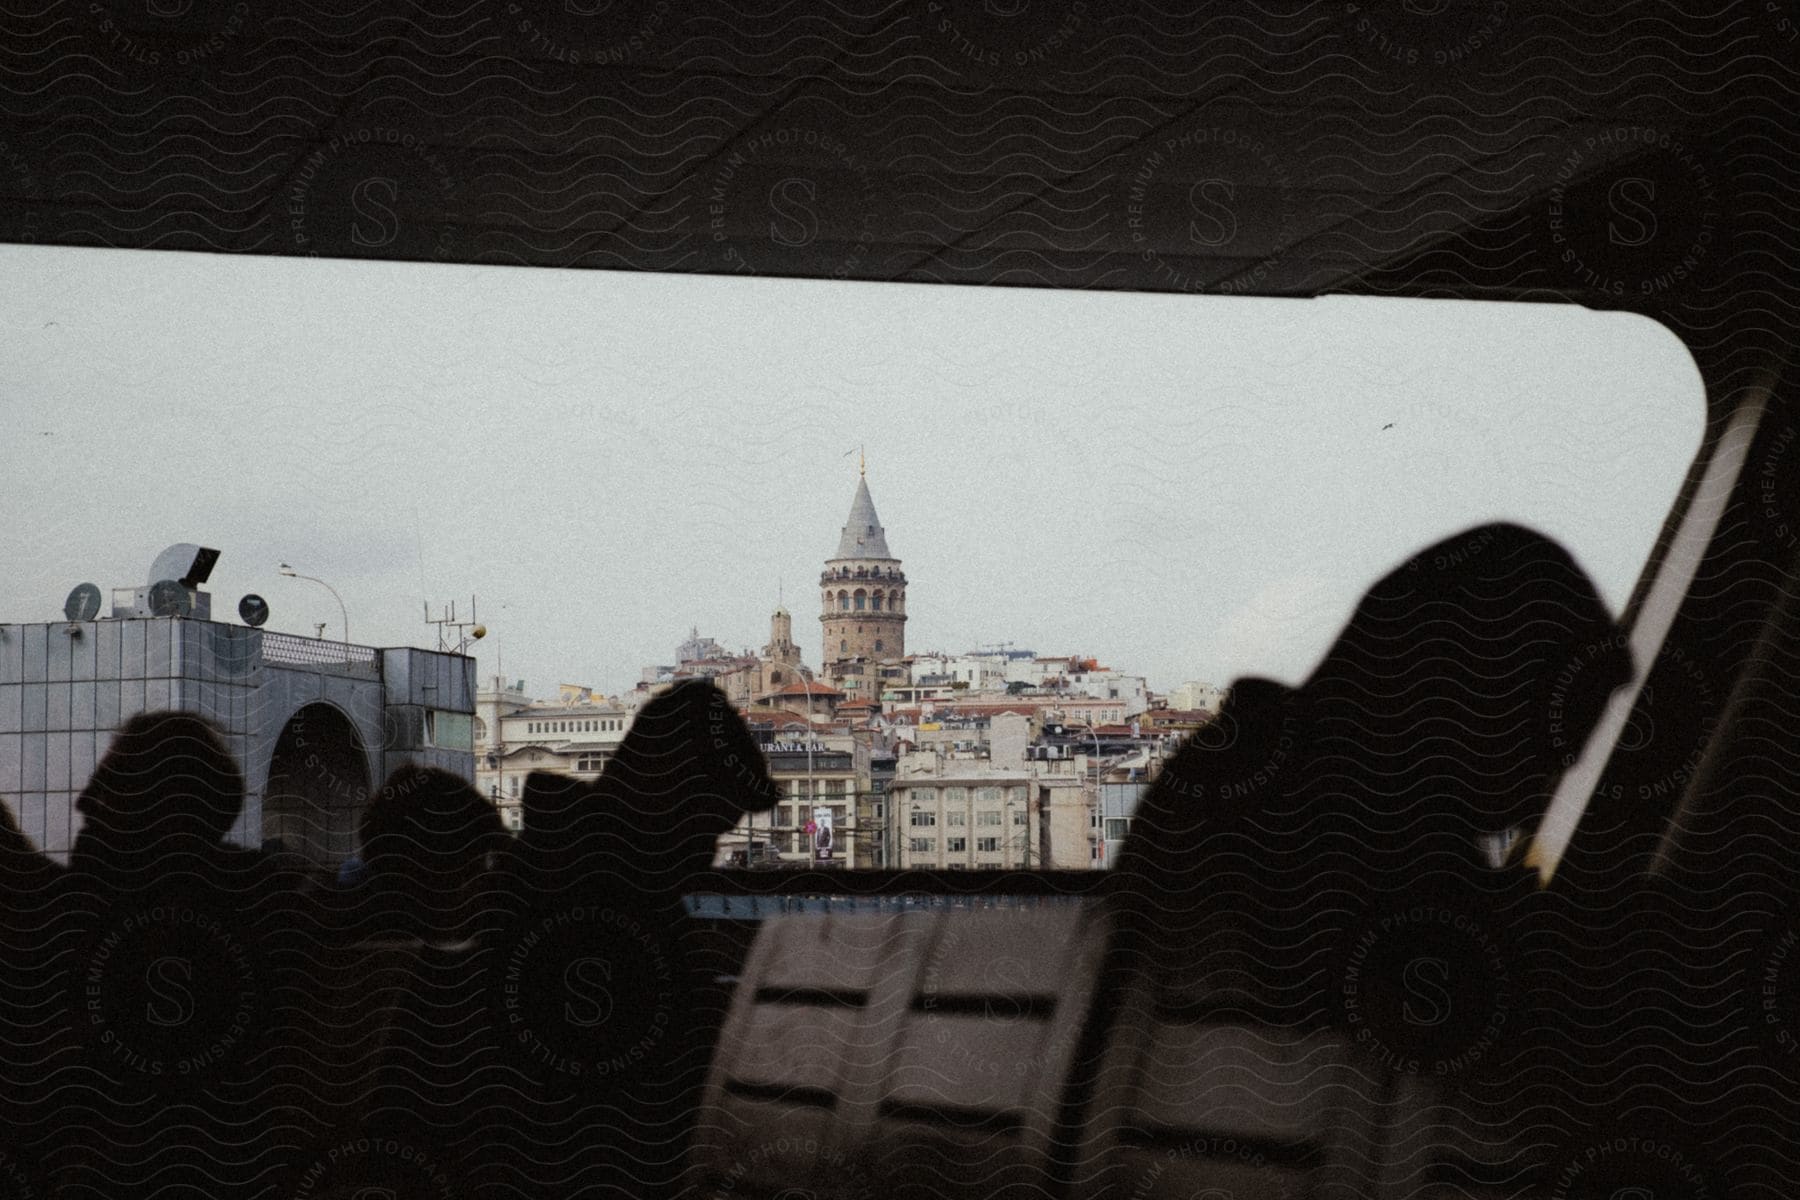 Several men sitting in chairs as a window faces a tourist destination in istanbul